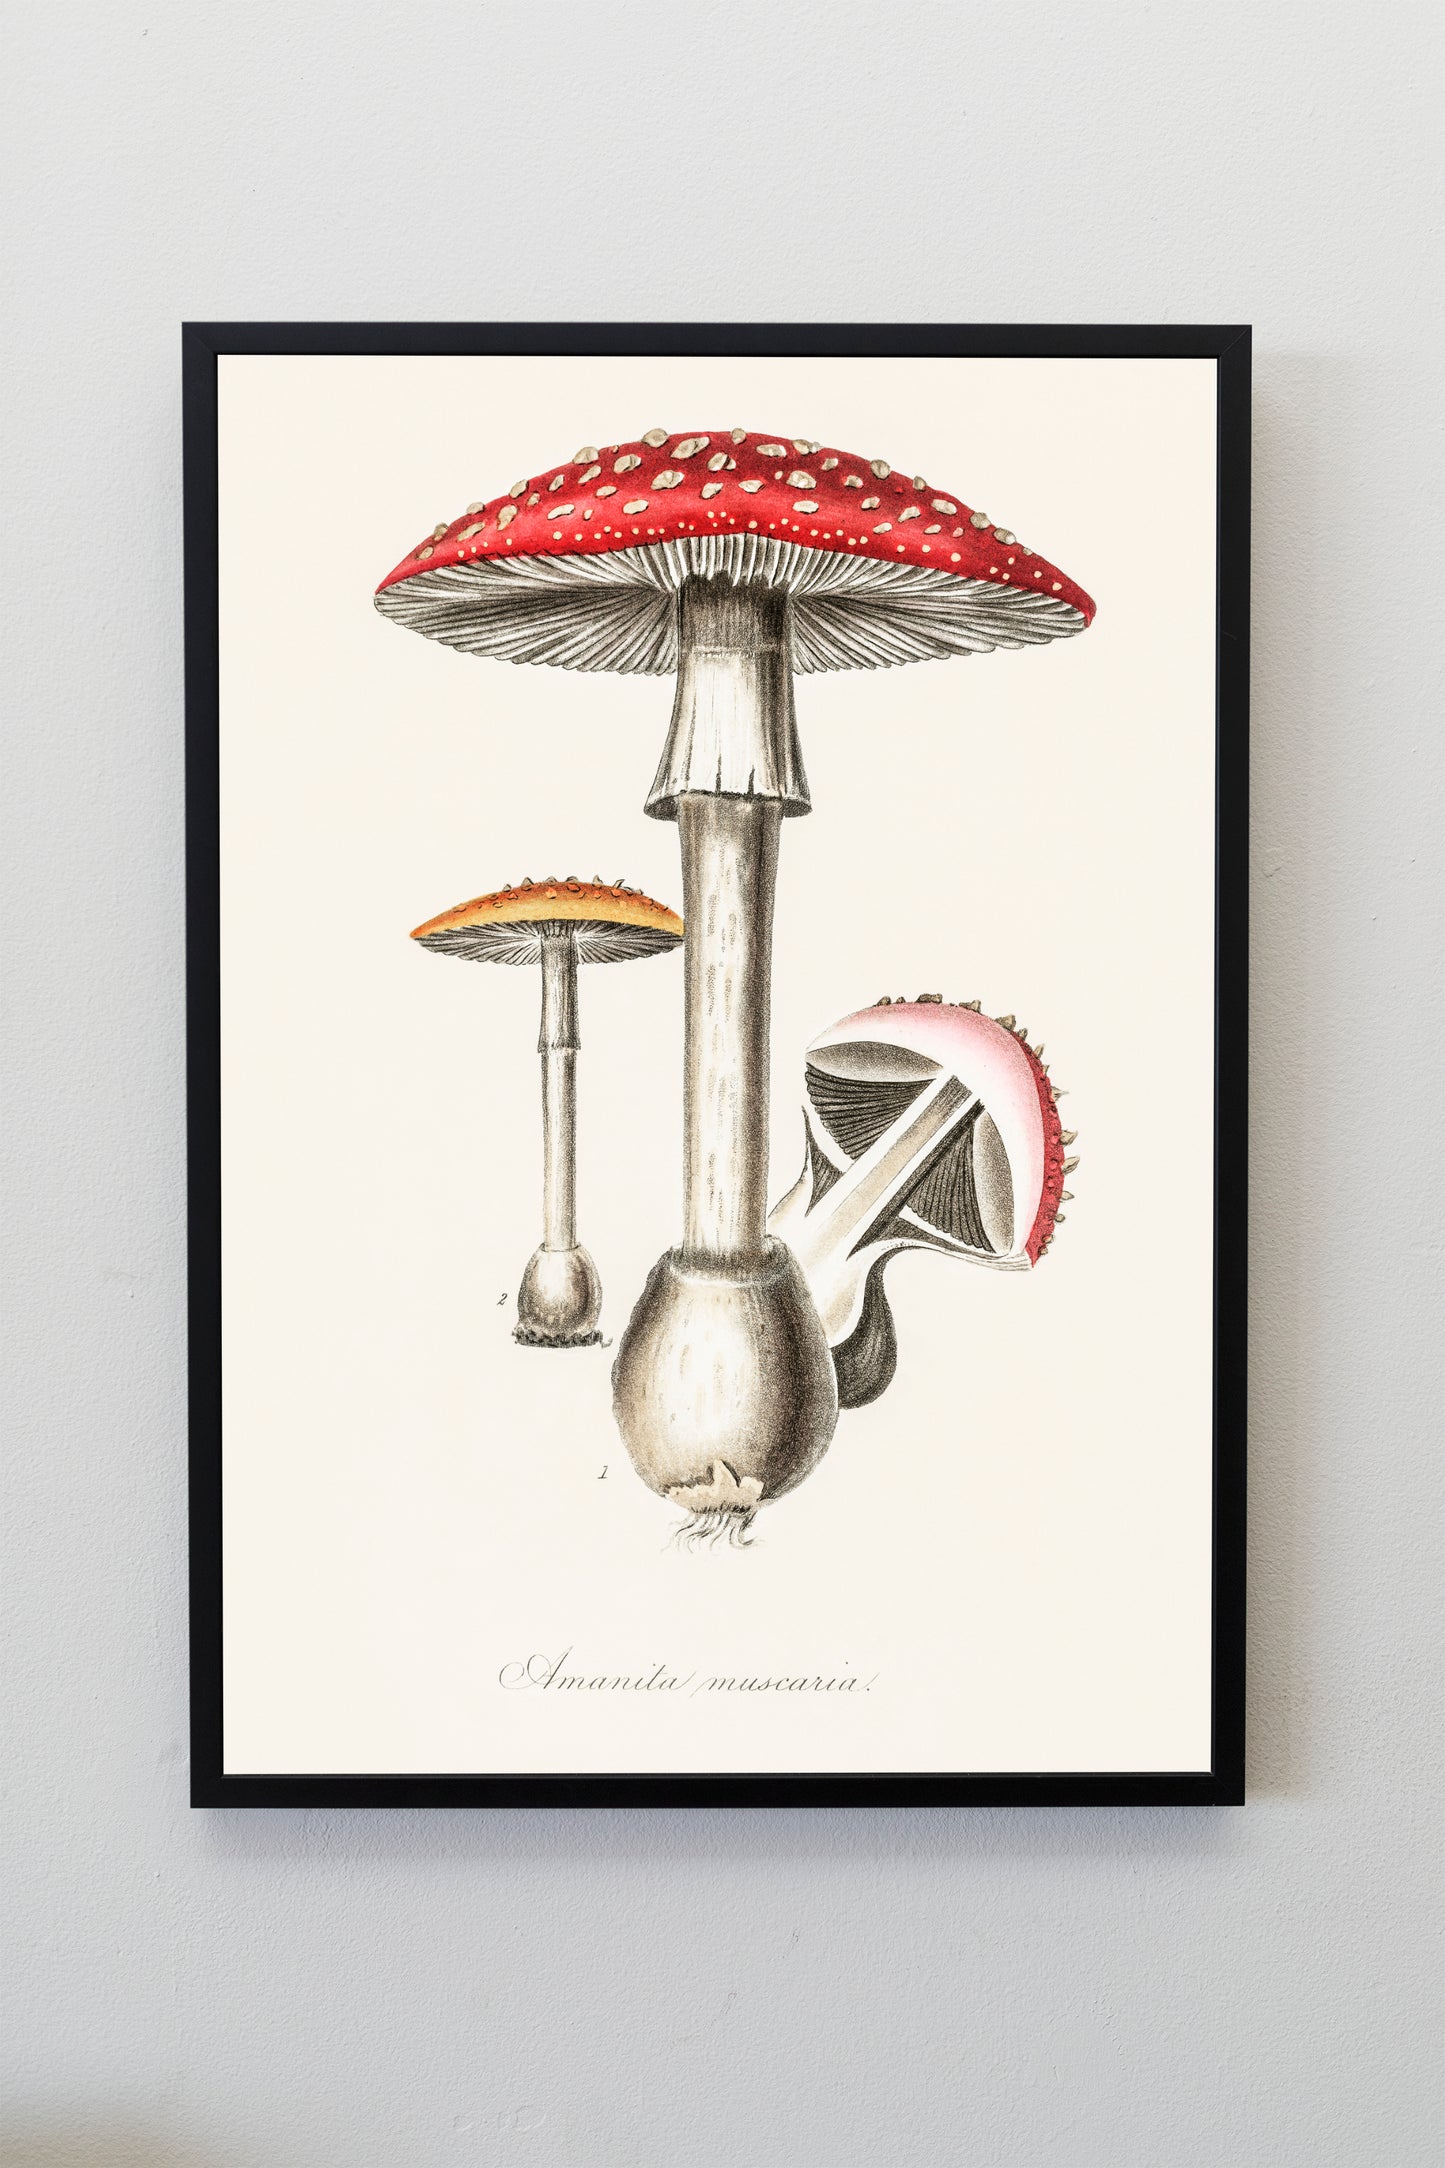 Fly agaric (Amanita muscaria) Fungi poisonous Mushroom Poster Print Wall Hanging Decor A4 A3 A2